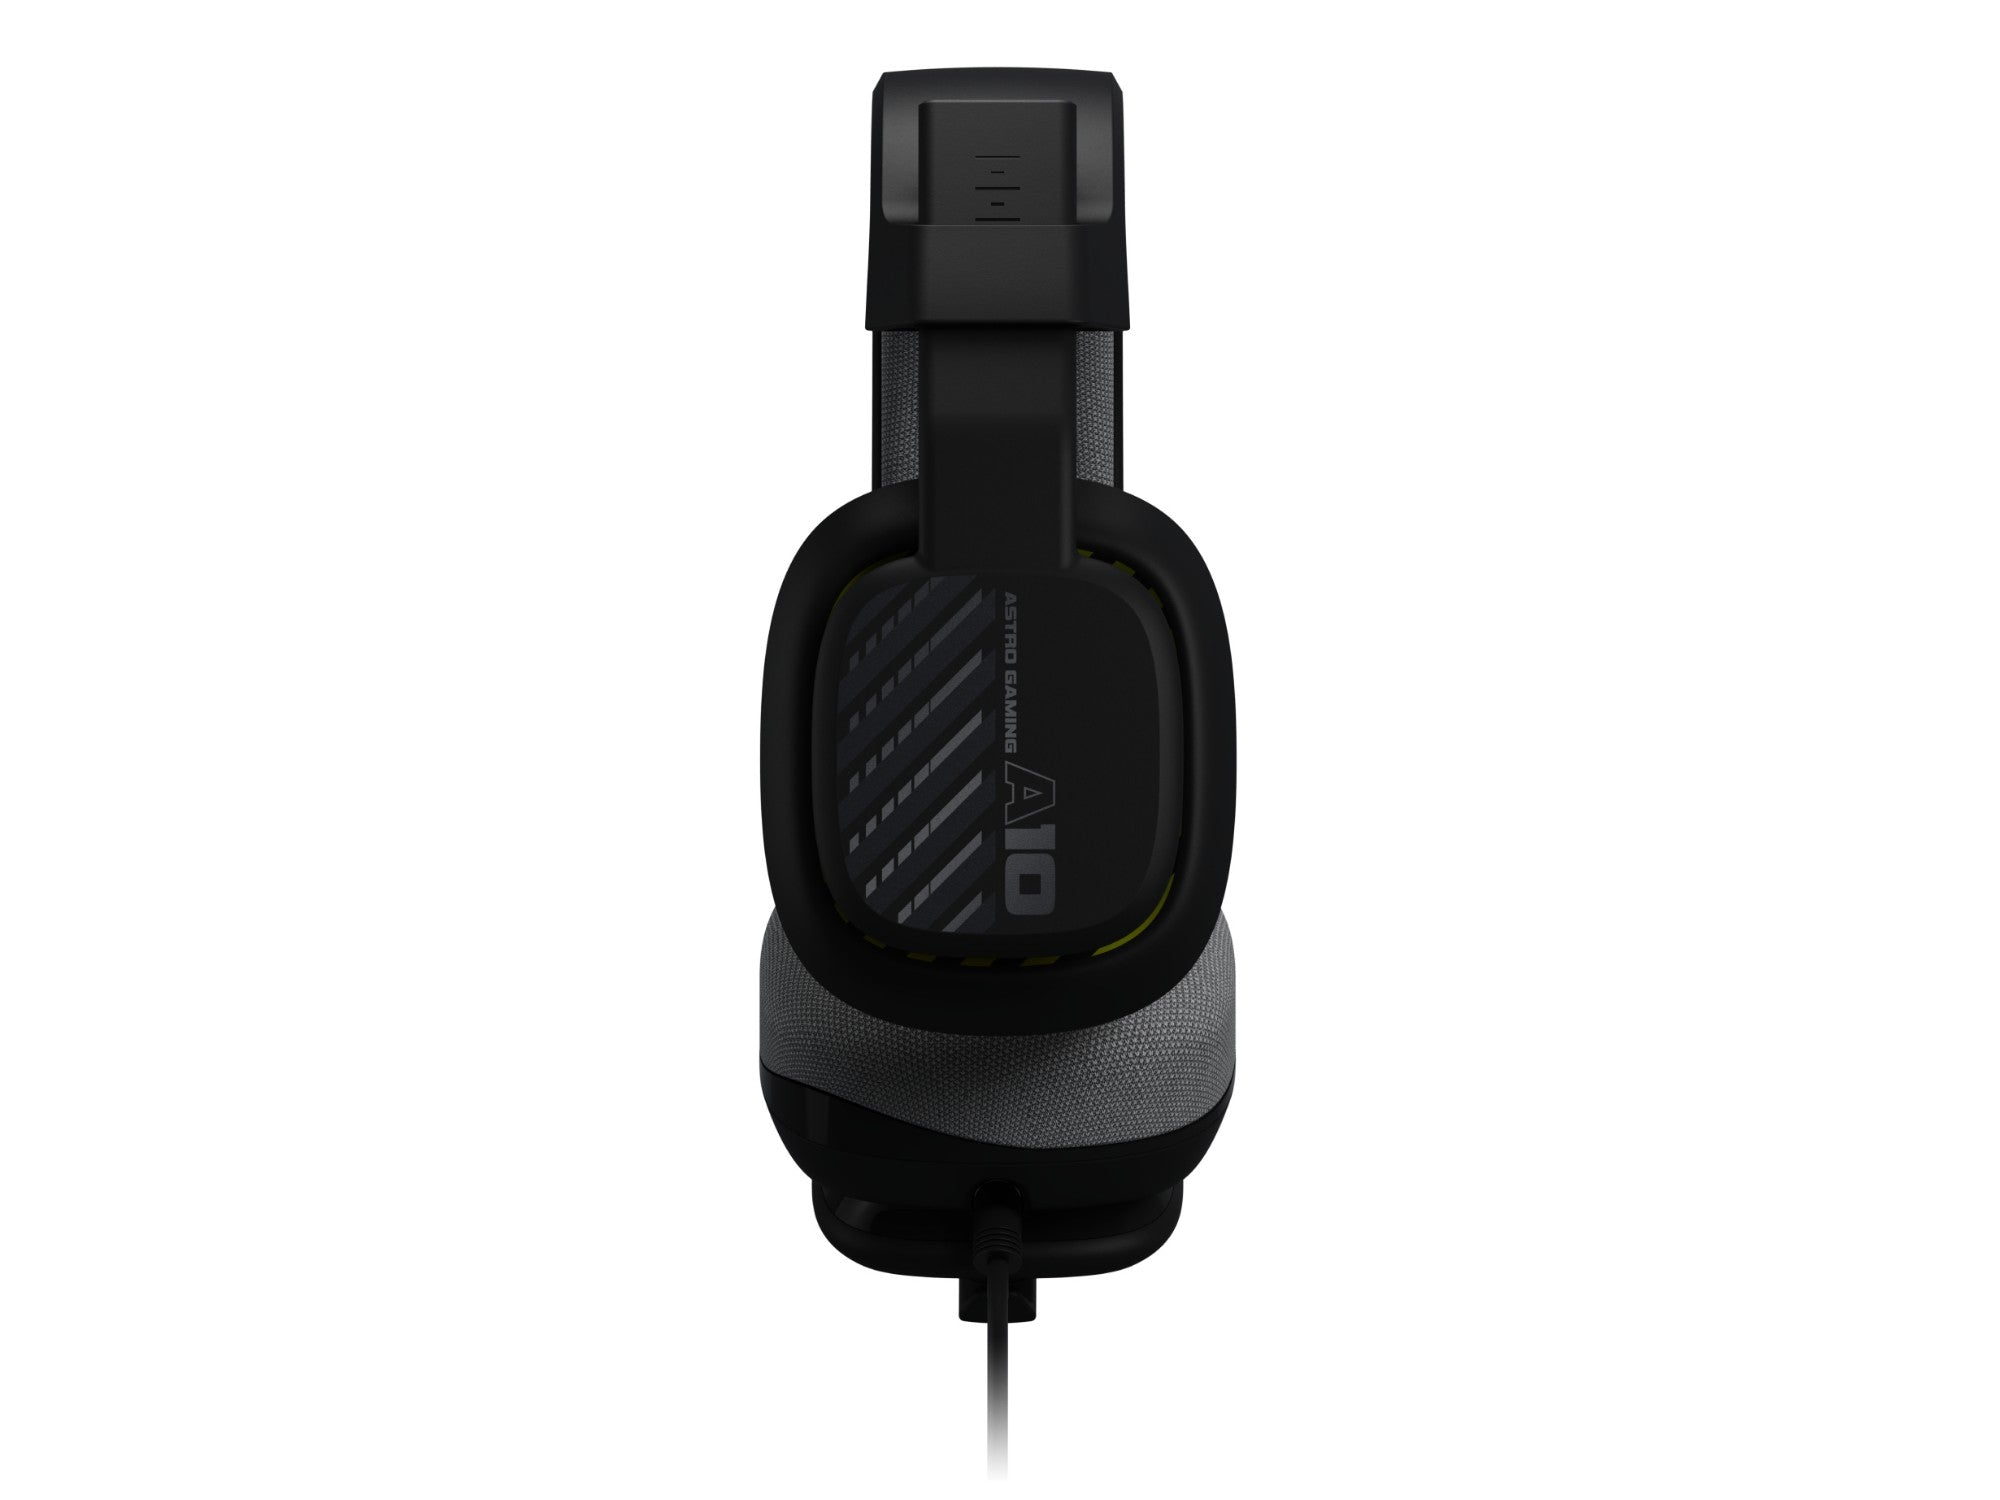 Logitech ASTRO Gaming A10 Headset [Black]